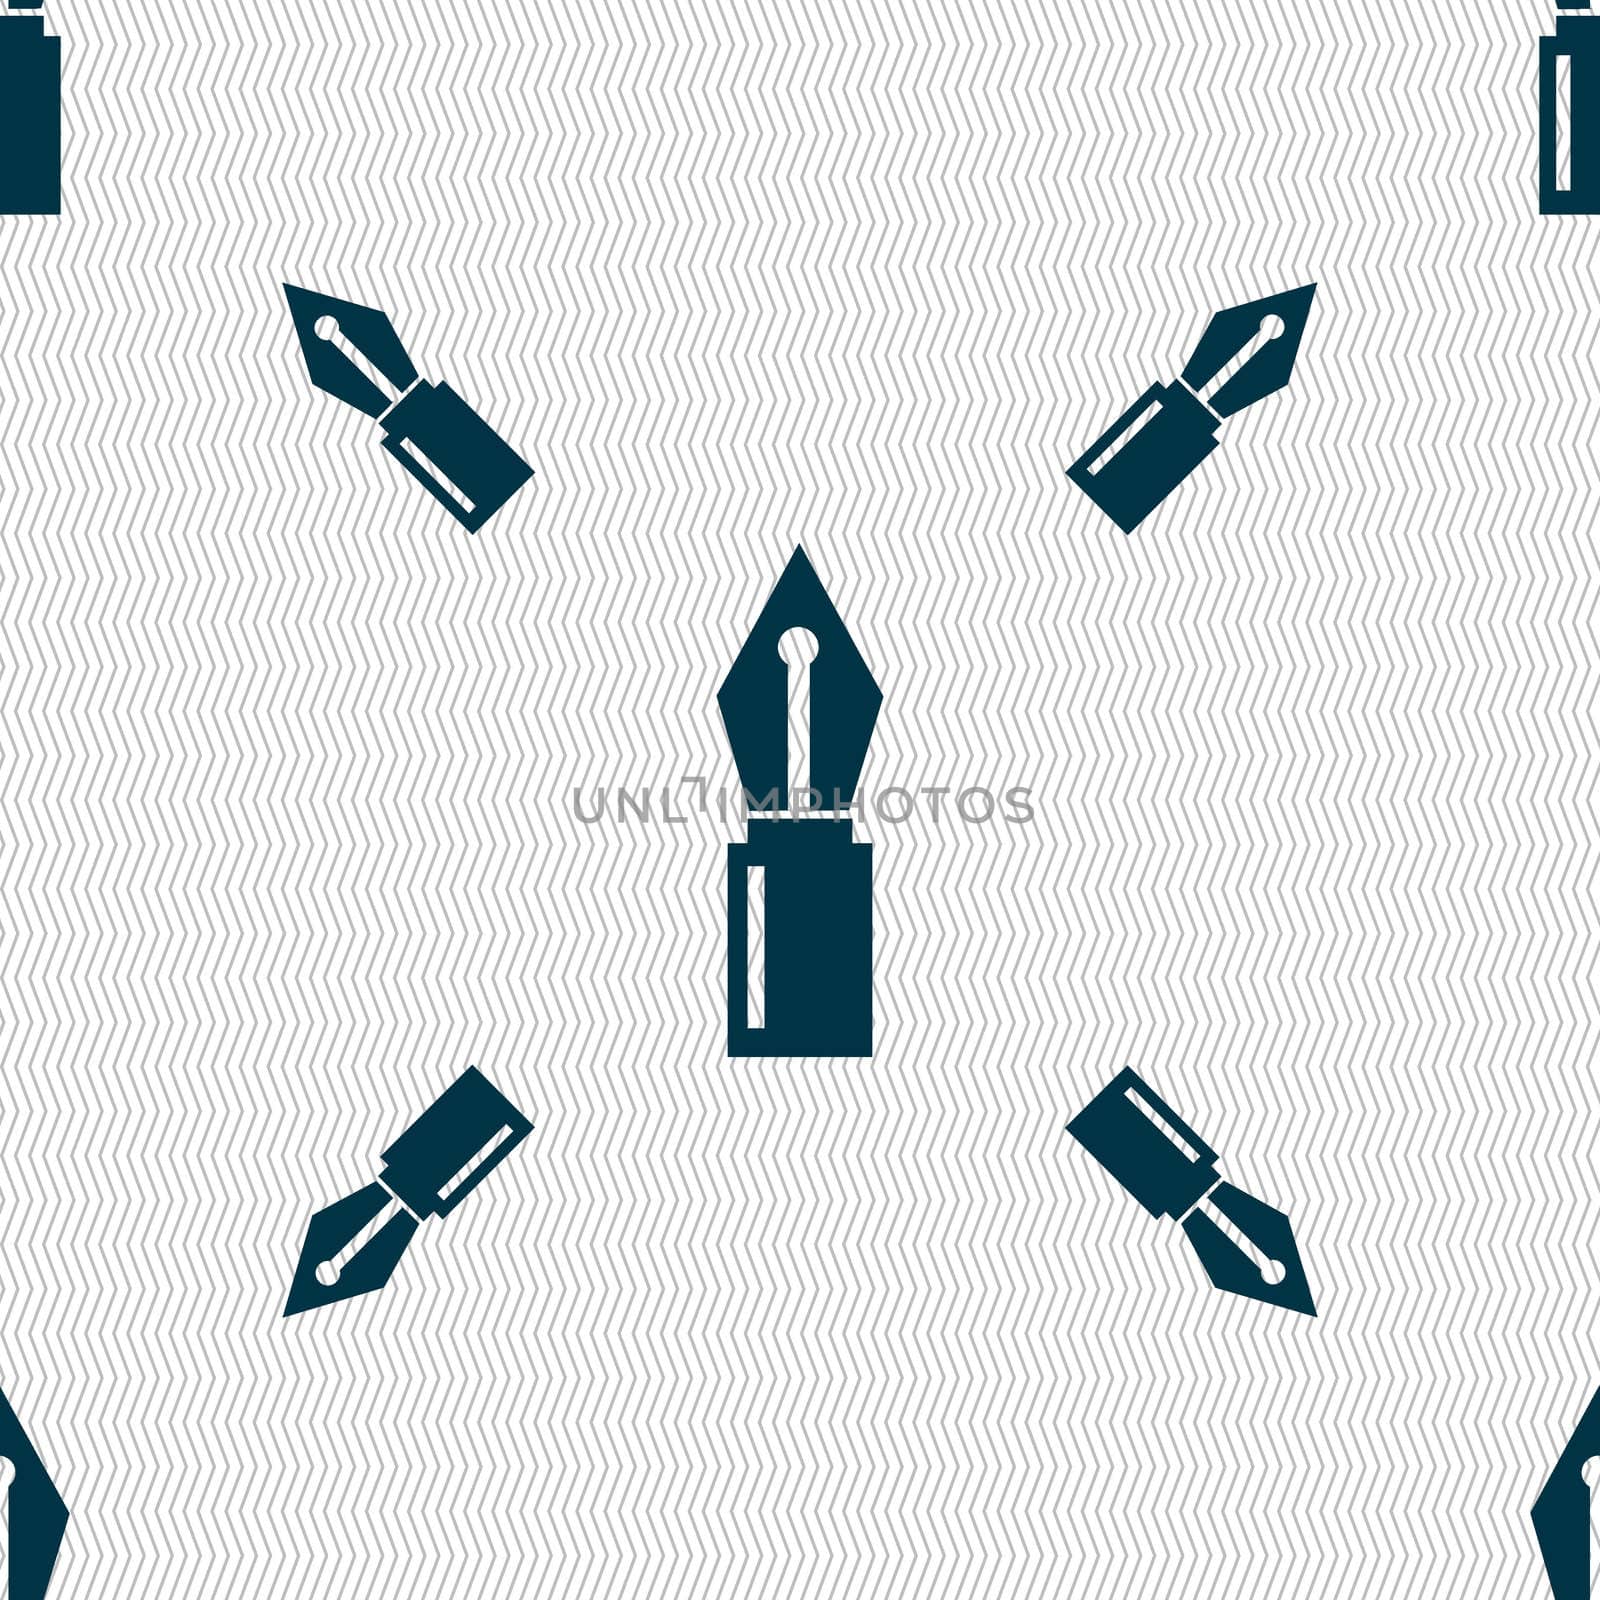 Pen sign icon. Edit content button. Seamless pattern with geometric texture. illustration